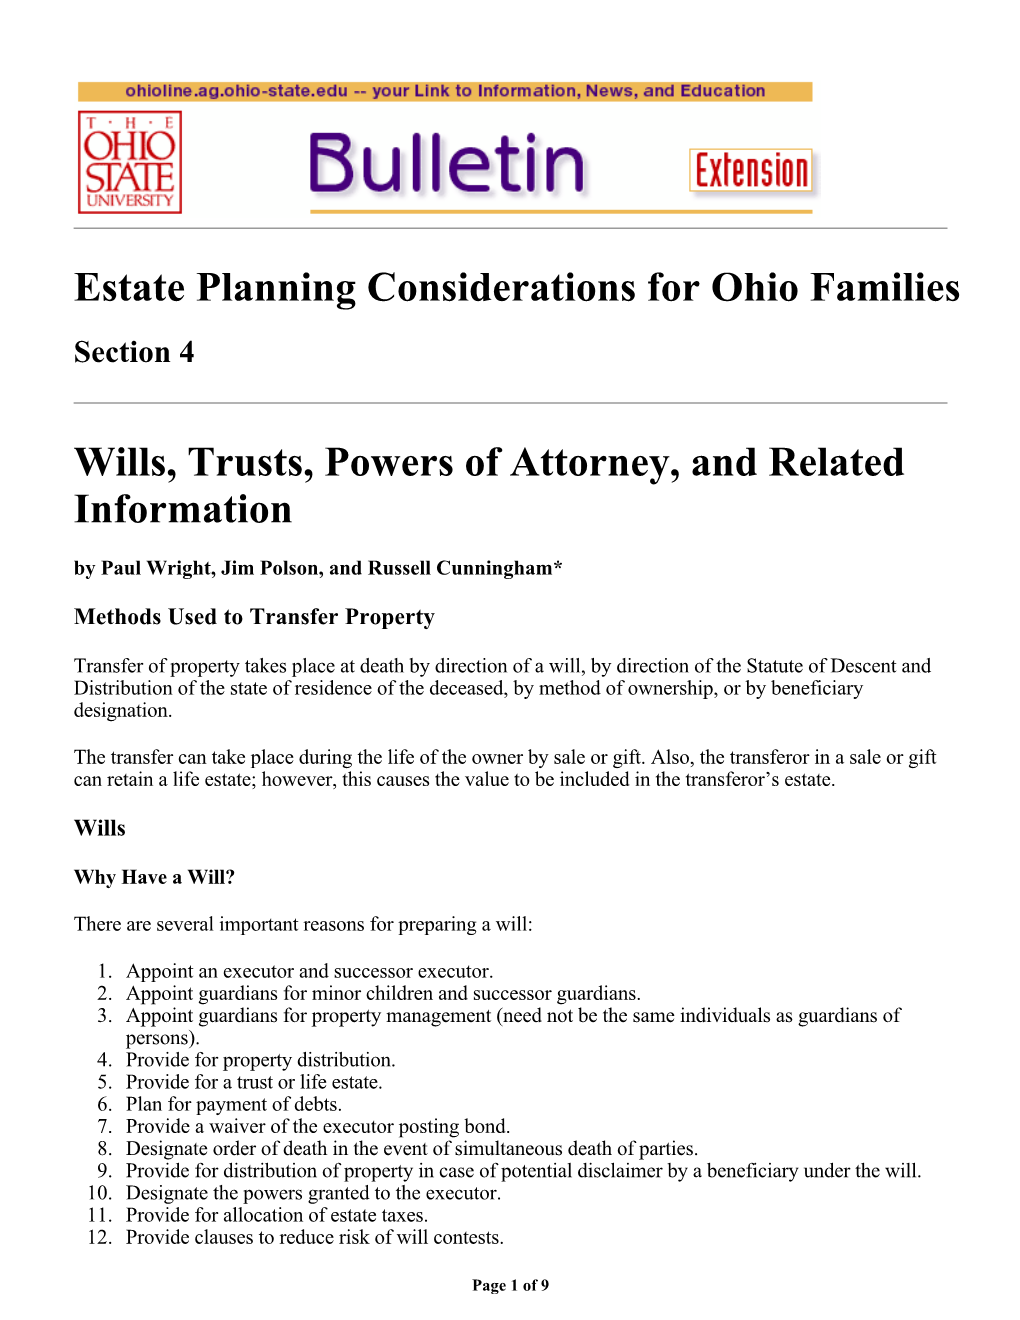 Estate Planning Considerations for Ohio Families Wills, Trusts, Powers